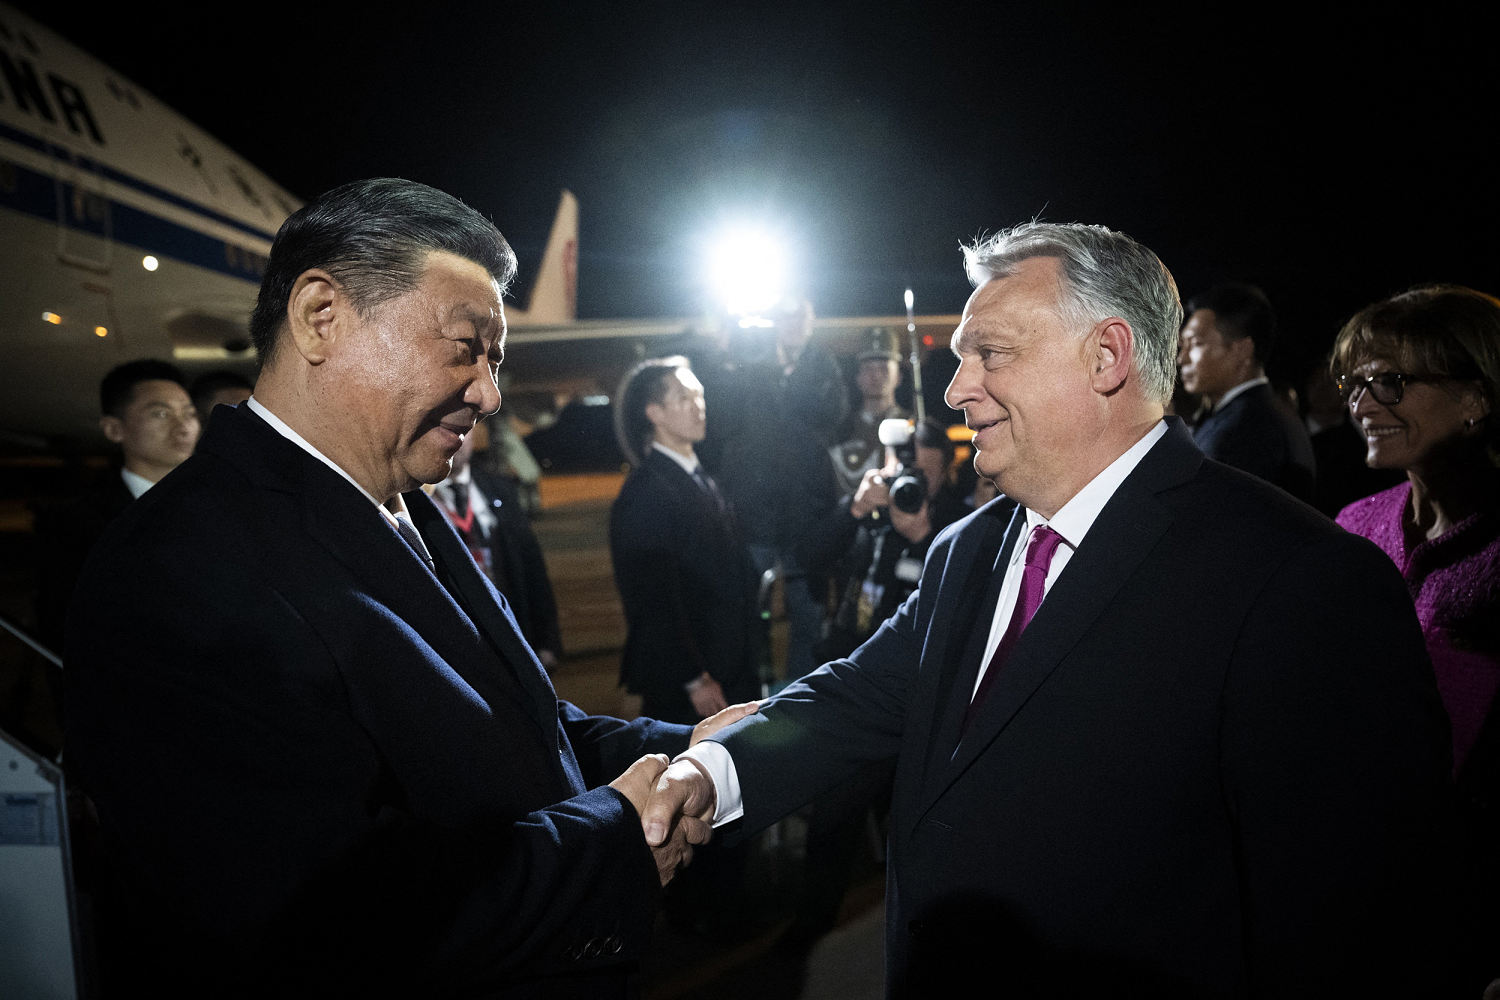 Hungary and China sign strategic cooperation agreement during visit by Xi